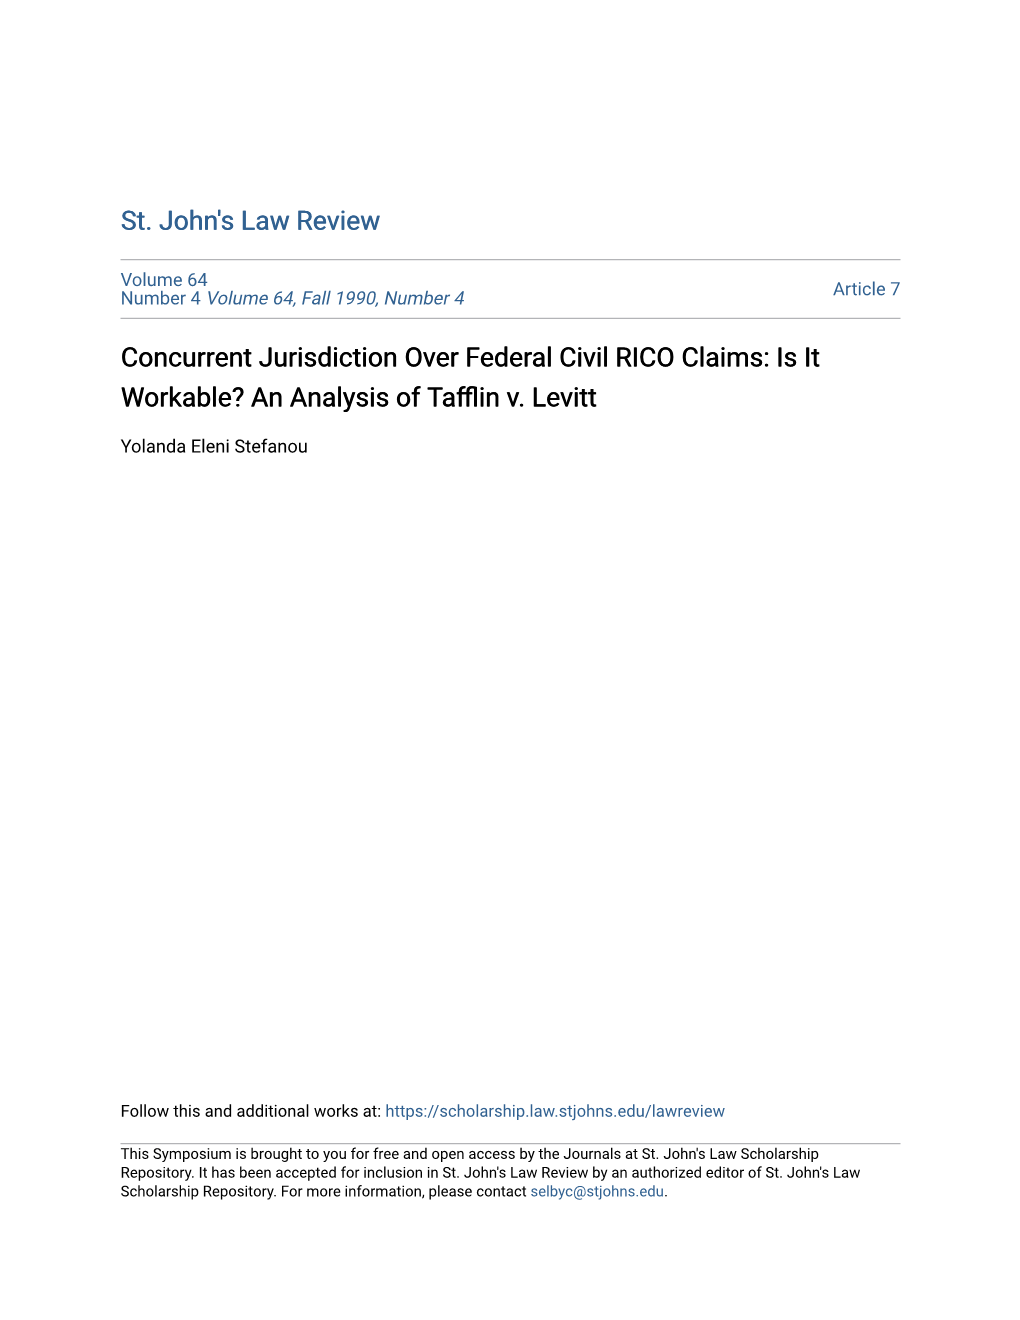 Concurrent Jurisdiction Over Federal Civil RICO Claims: Is It Workable? an Analysis of Tafflin